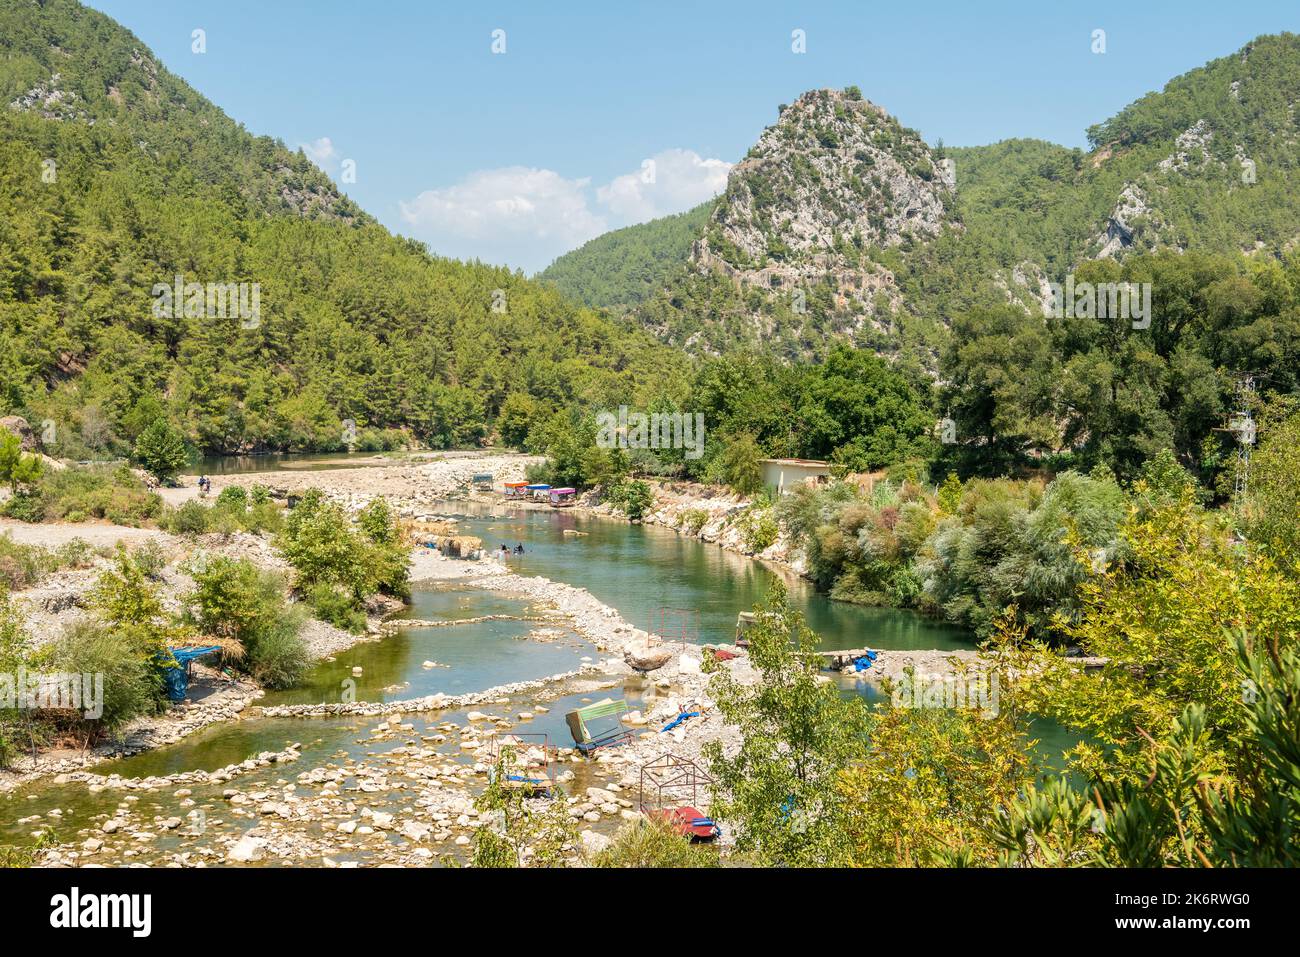 Alara (Uluguney) River running among mountains near Alanya, Turkey. View with basic picnic facilities and people, in summer. Stock Photo